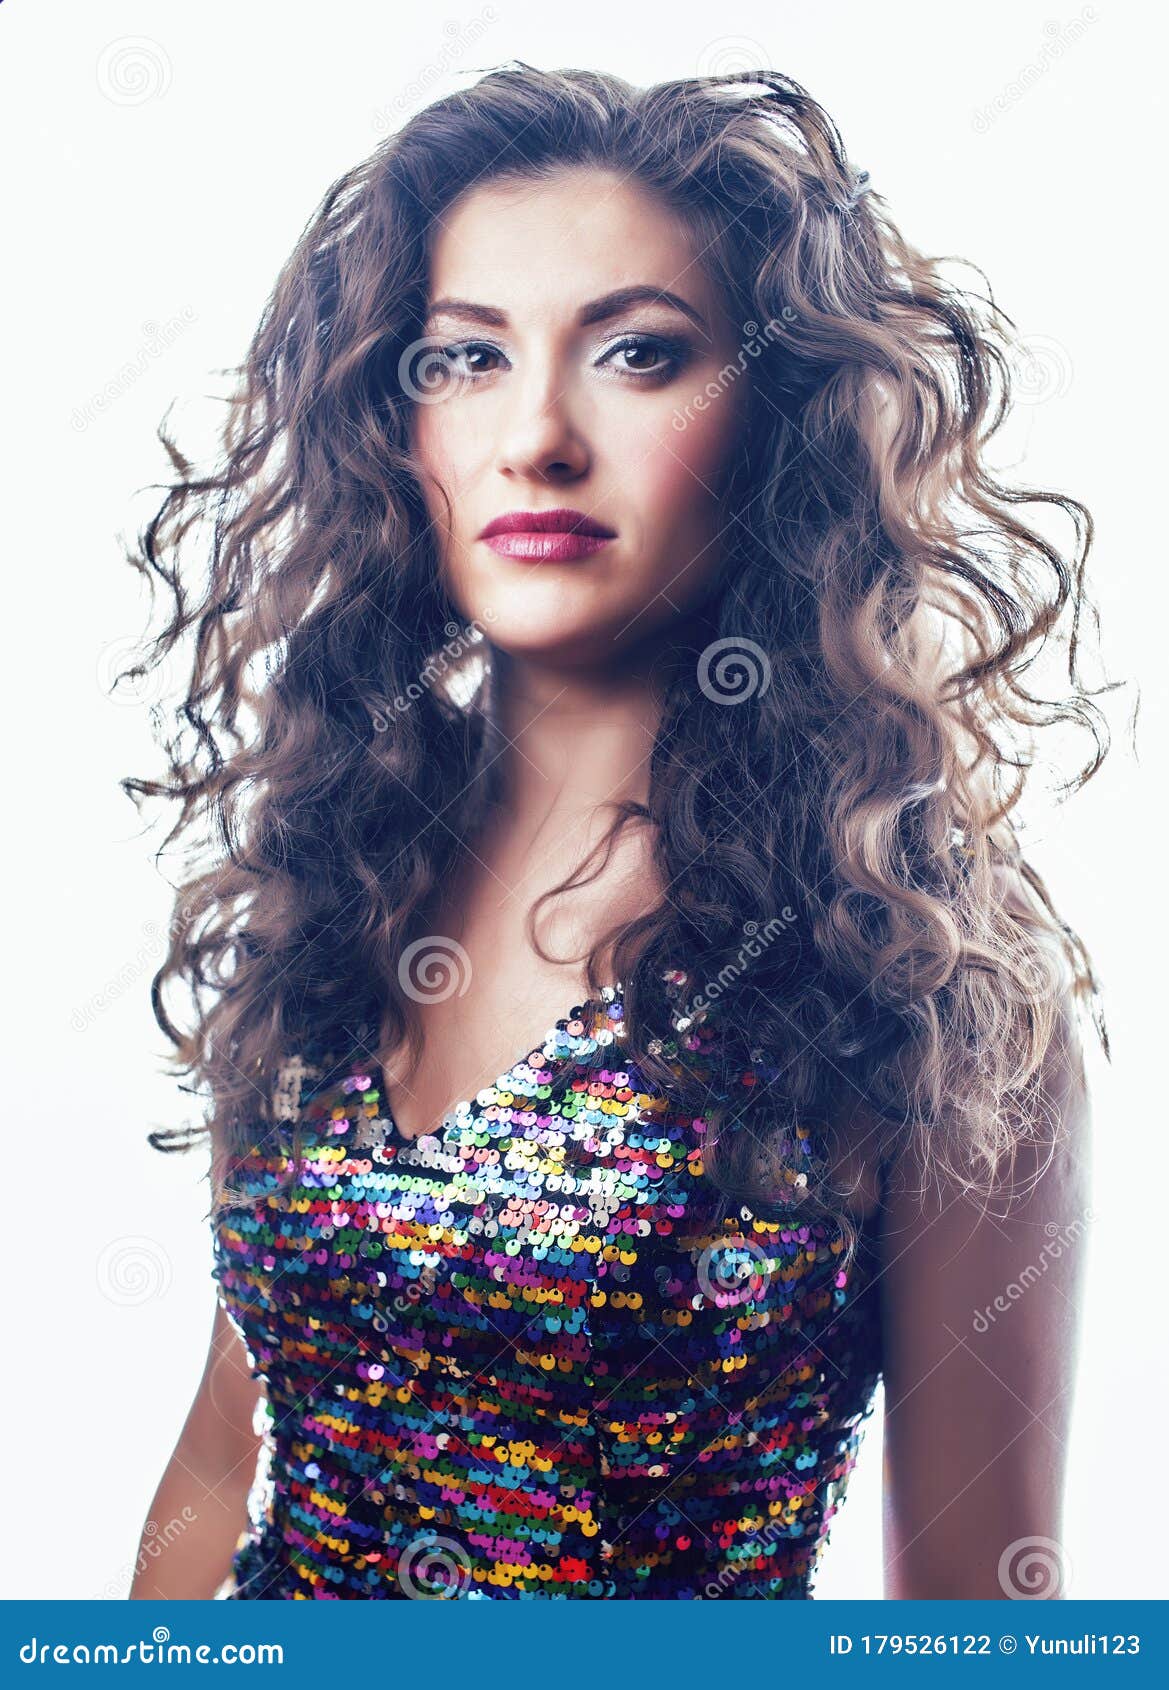 Young Pretty Woman with Curly Hair Party Fashion Style Posing Emotional on  White Background Isolated, Lifestyle People Stock Photo - Image of hairstyle,  bright: 179526122